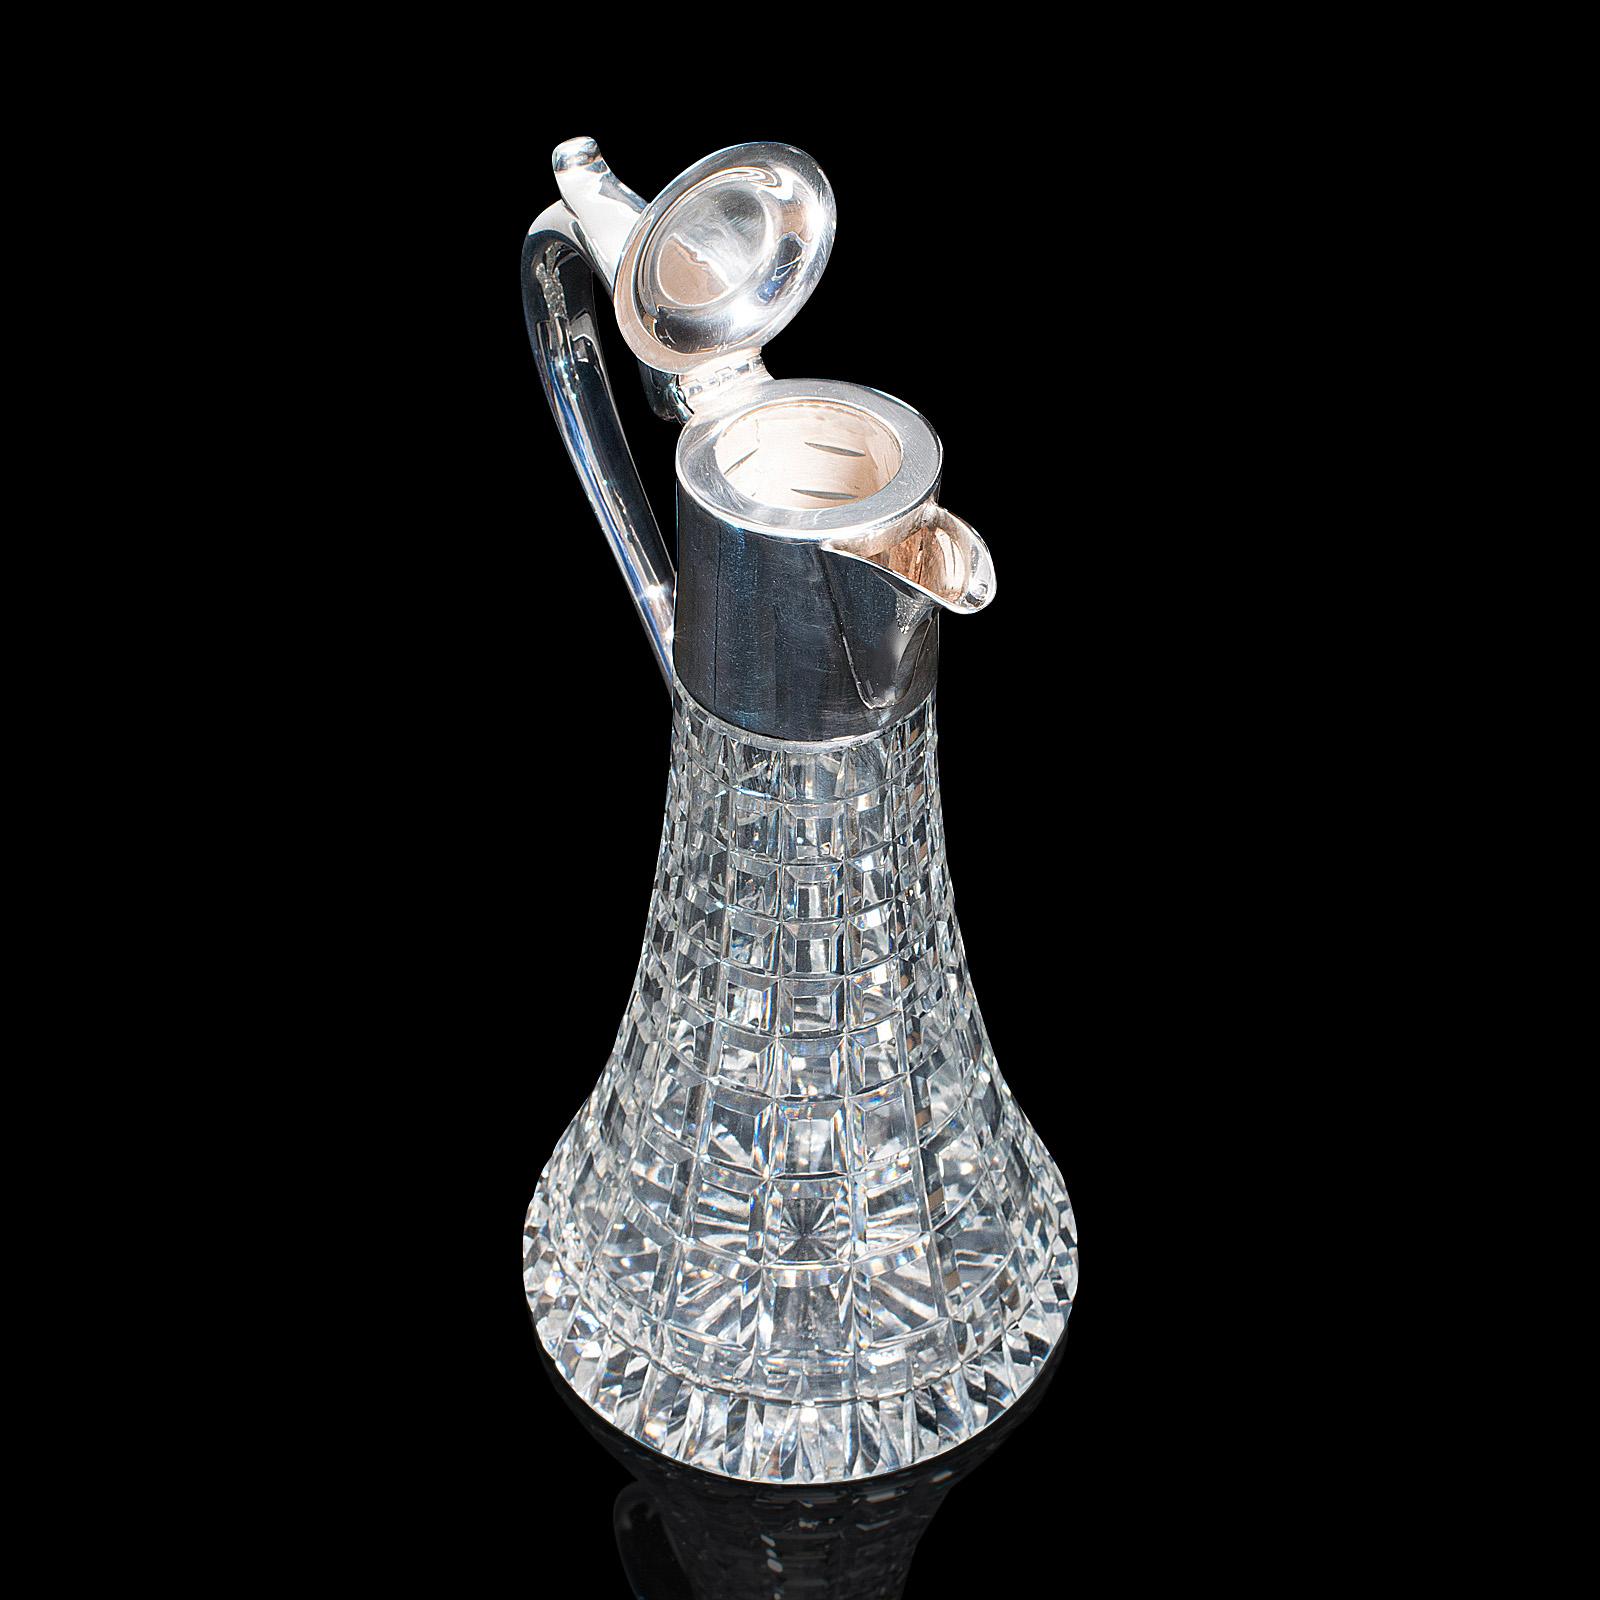 Vintage Claret Jug, English, Cut Glass, Wine, Spirit Decanter, Late 20th Century In Good Condition For Sale In Hele, Devon, GB